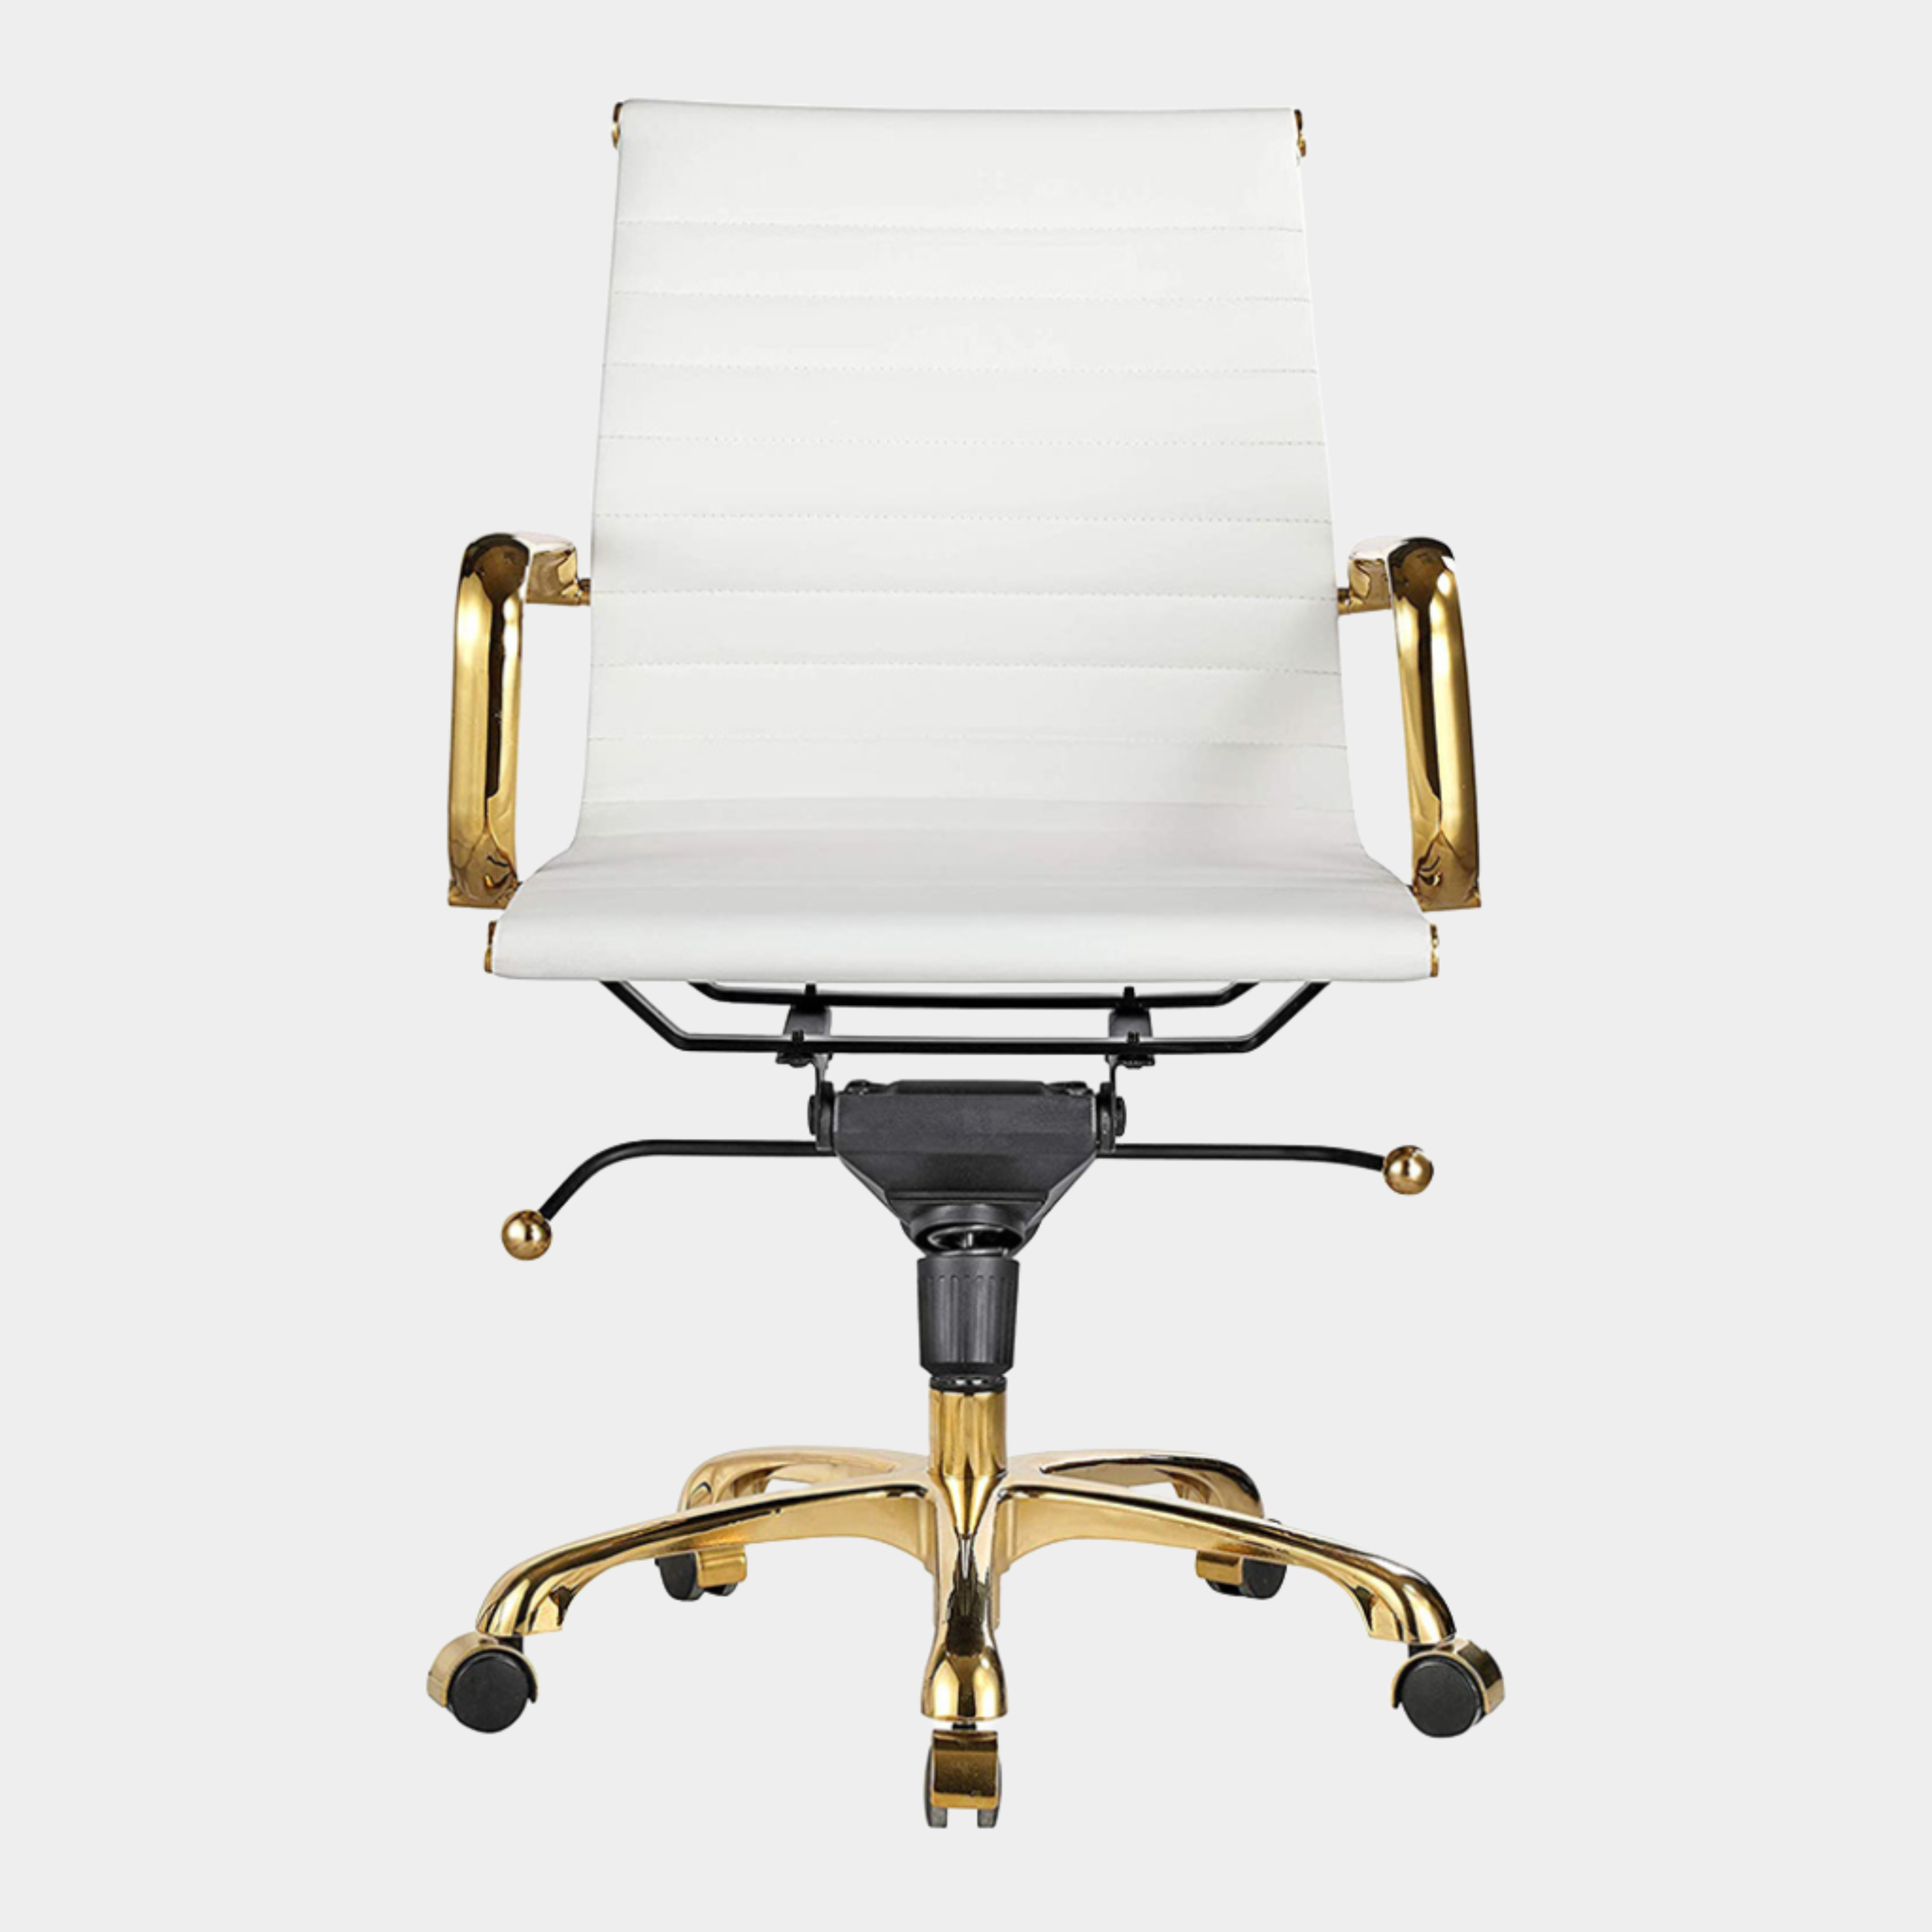 Toni Office Chair with Gold Frame - Low Back